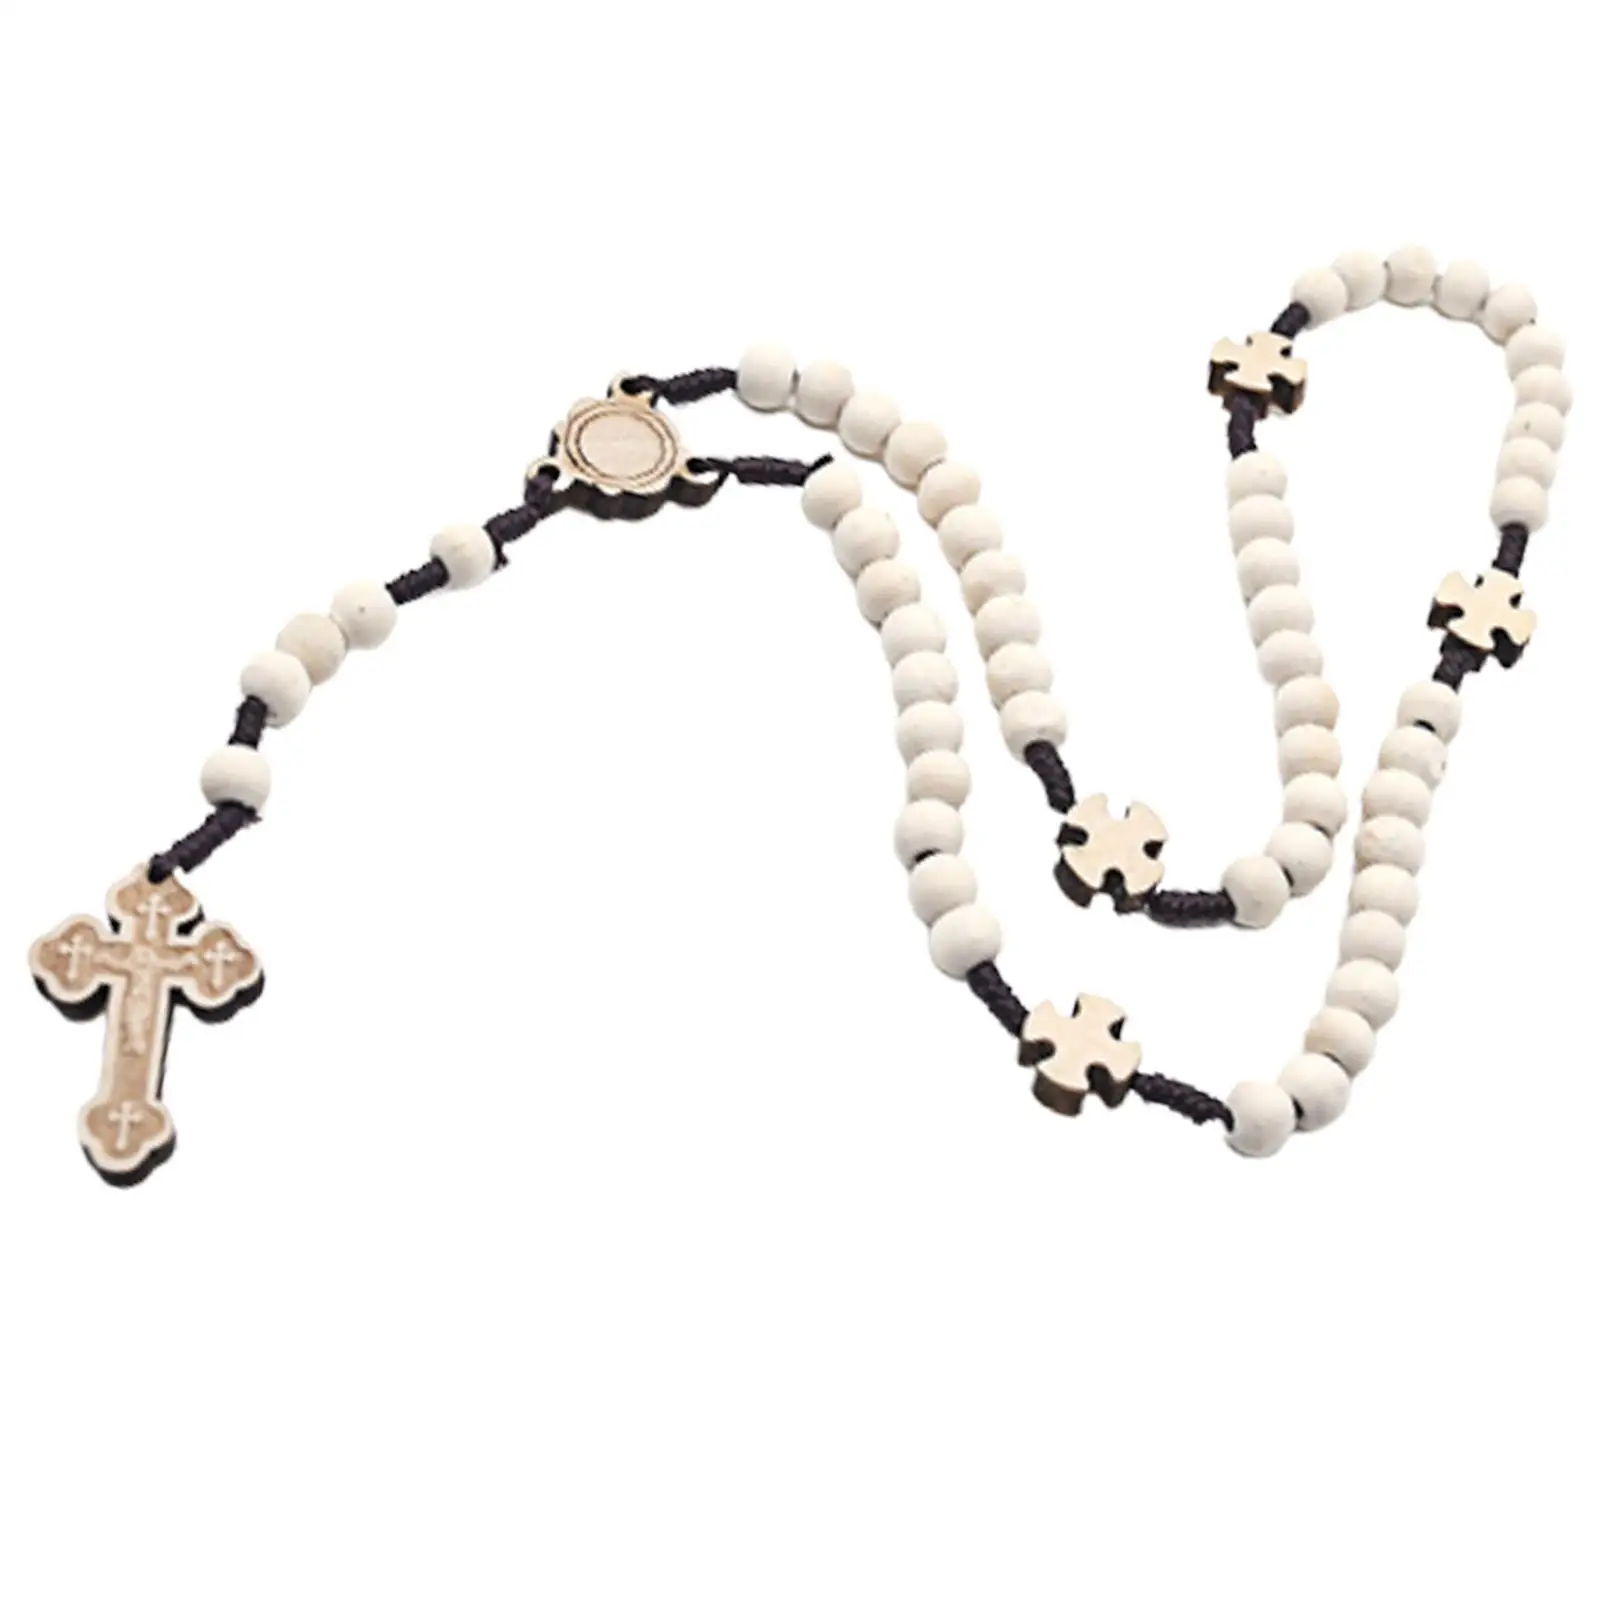 Rosary Cross Pendant Necklace Decorative Chain with Crucifix Gift Jewelry for Christmas Women Men Mother Day Wedding Birthday